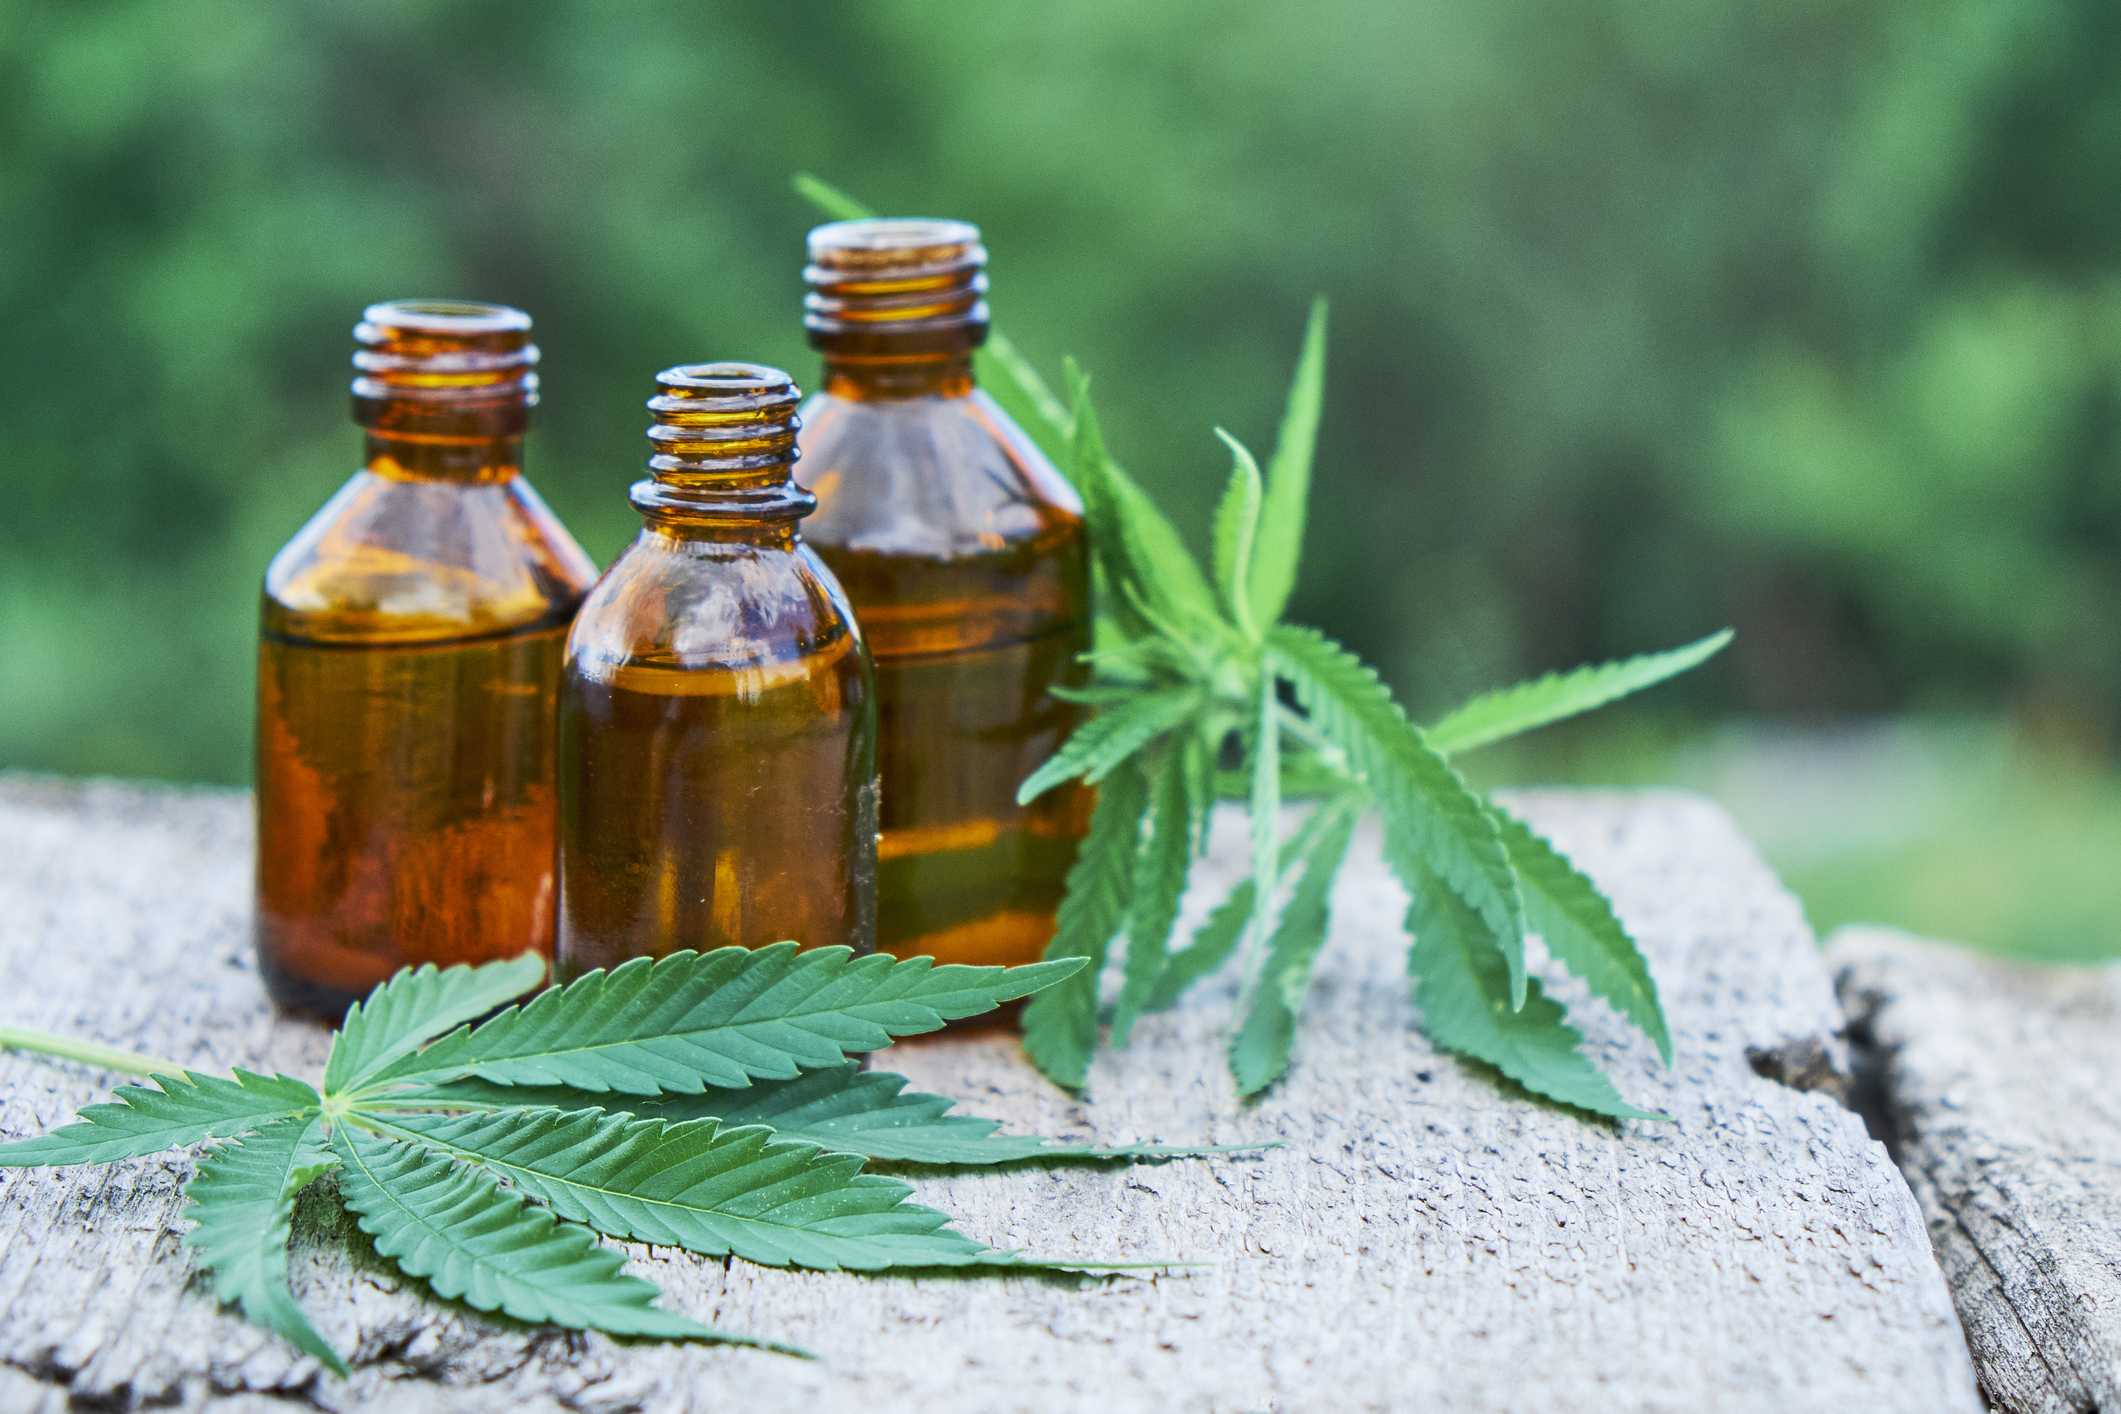 Where To Buy Cbd Oil In Beaverton Oil - Cbd|Oil|Cannabidiol|Products|View|Abstract|Effects|Hemp|Cannabis|Product|Thc|Pain|People|Health|Body|Plant|Cannabinoids|Medications|Oils|Drug|Benefits|System|Study|Marijuana|Anxiety|Side|Research|Effect|Liver|Quality|Treatment|Studies|Epilepsy|Symptoms|Gummies|Compounds|Dose|Time|Inflammation|Bottle|Cbd Oil|View Abstract|Side Effects|Cbd Products|Endocannabinoid System|Multiple Sclerosis|Cbd Oils|Cbd Gummies|Cannabis Plant|Hemp Oil|Cbd Product|Hemp Plant|United States|Cytochrome P450|Many People|Chronic Pain|Nuleaf Naturals|Royal Cbd|Full-Spectrum Cbd Oil|Drug Administration|Cbd Oil Products|Medical Marijuana|Drug Test|Heavy Metals|Clinical Trial|Clinical Trials|Cbd Oil Side|Rating Highlights|Wide Variety|Animal Studies